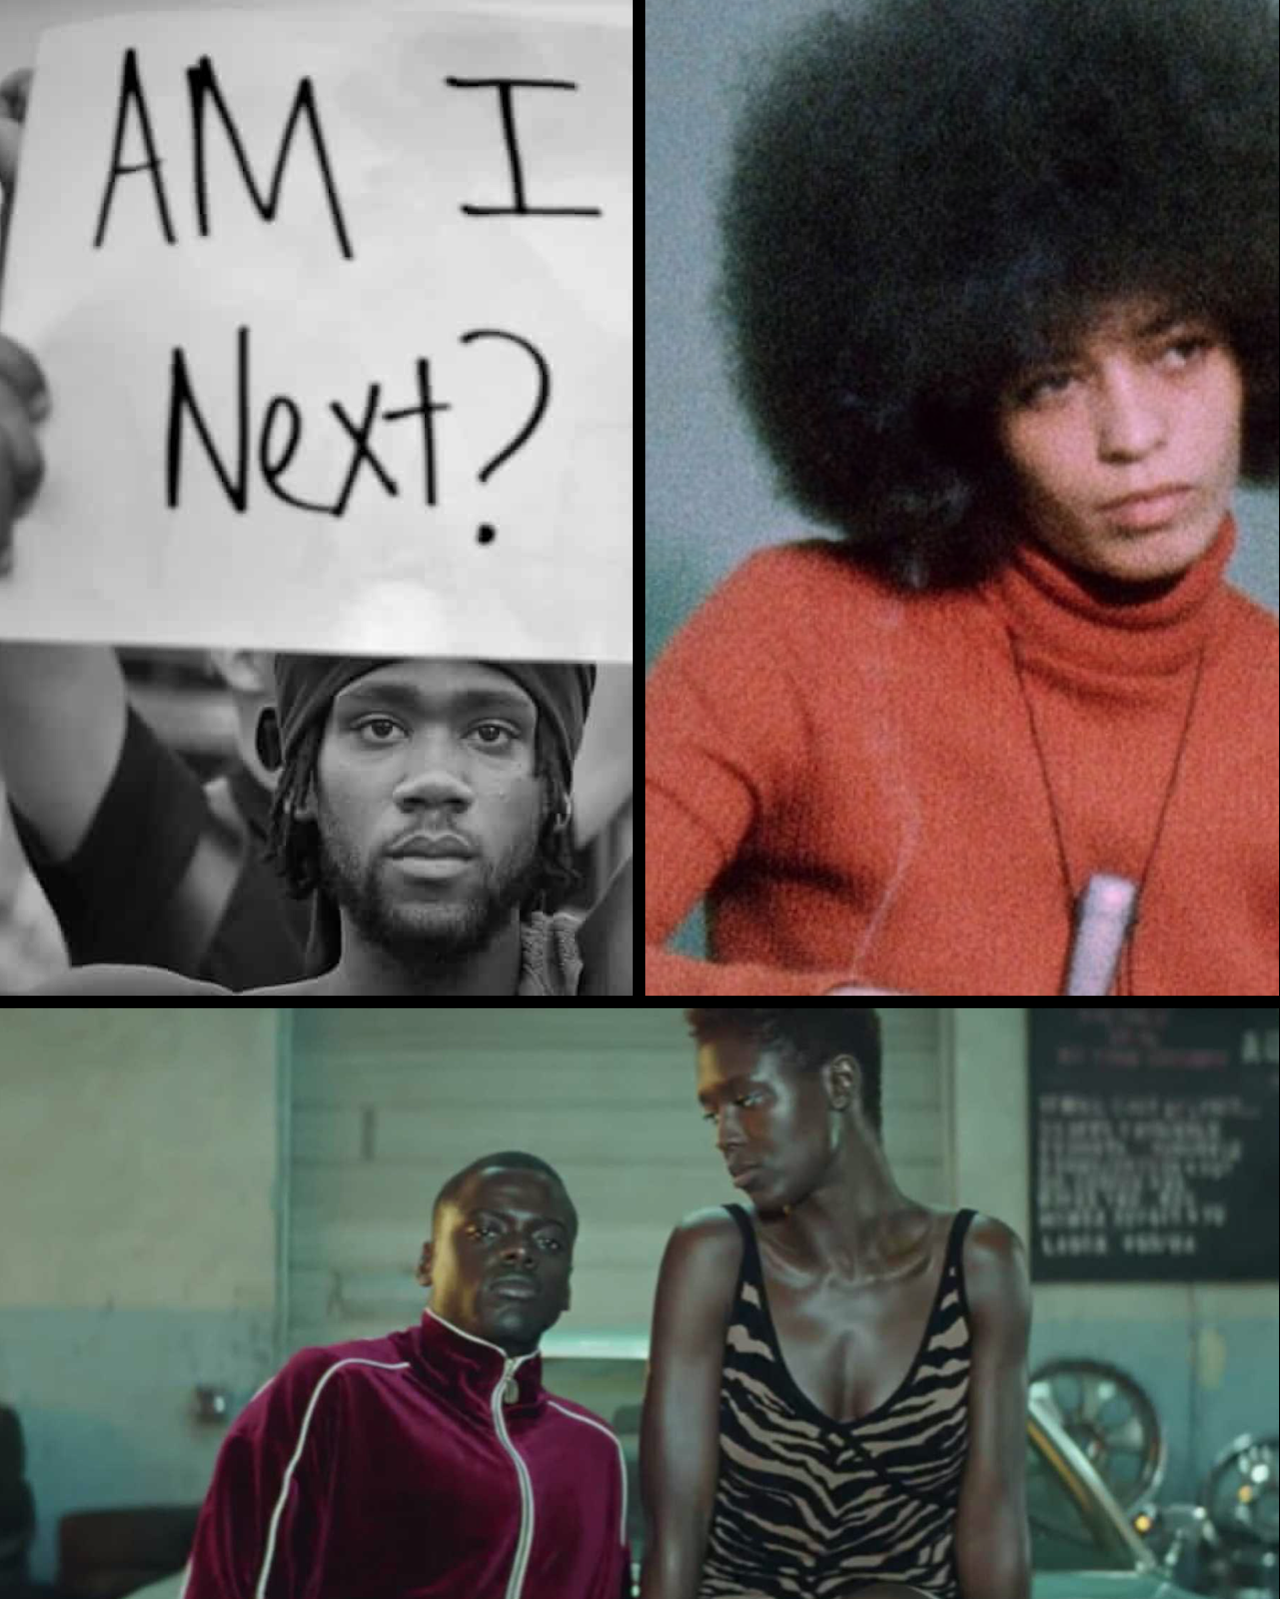 30 Films that help make sense of this time and inform on issues of race and racism.